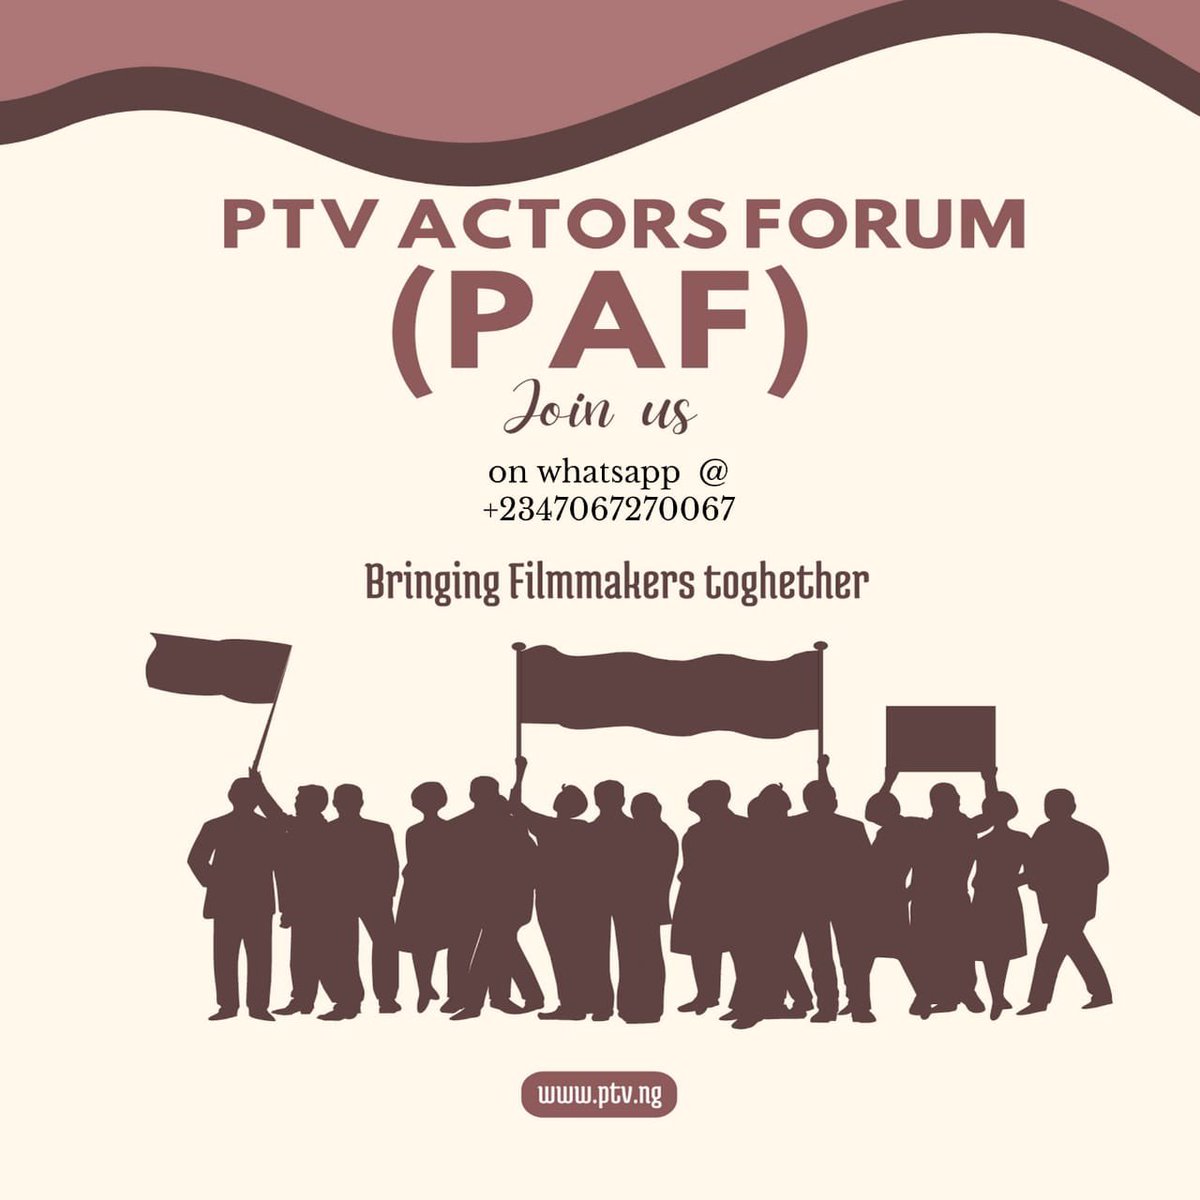 Are you an actor looking for an opportunity to be part of the movie industry? Then look no further. Join the PTV actors forum  (PAF) to feature in atleast three movies in a year.

#filmmaking #PAF #ptv.ng #shortmovies #shortfilms #nollywood